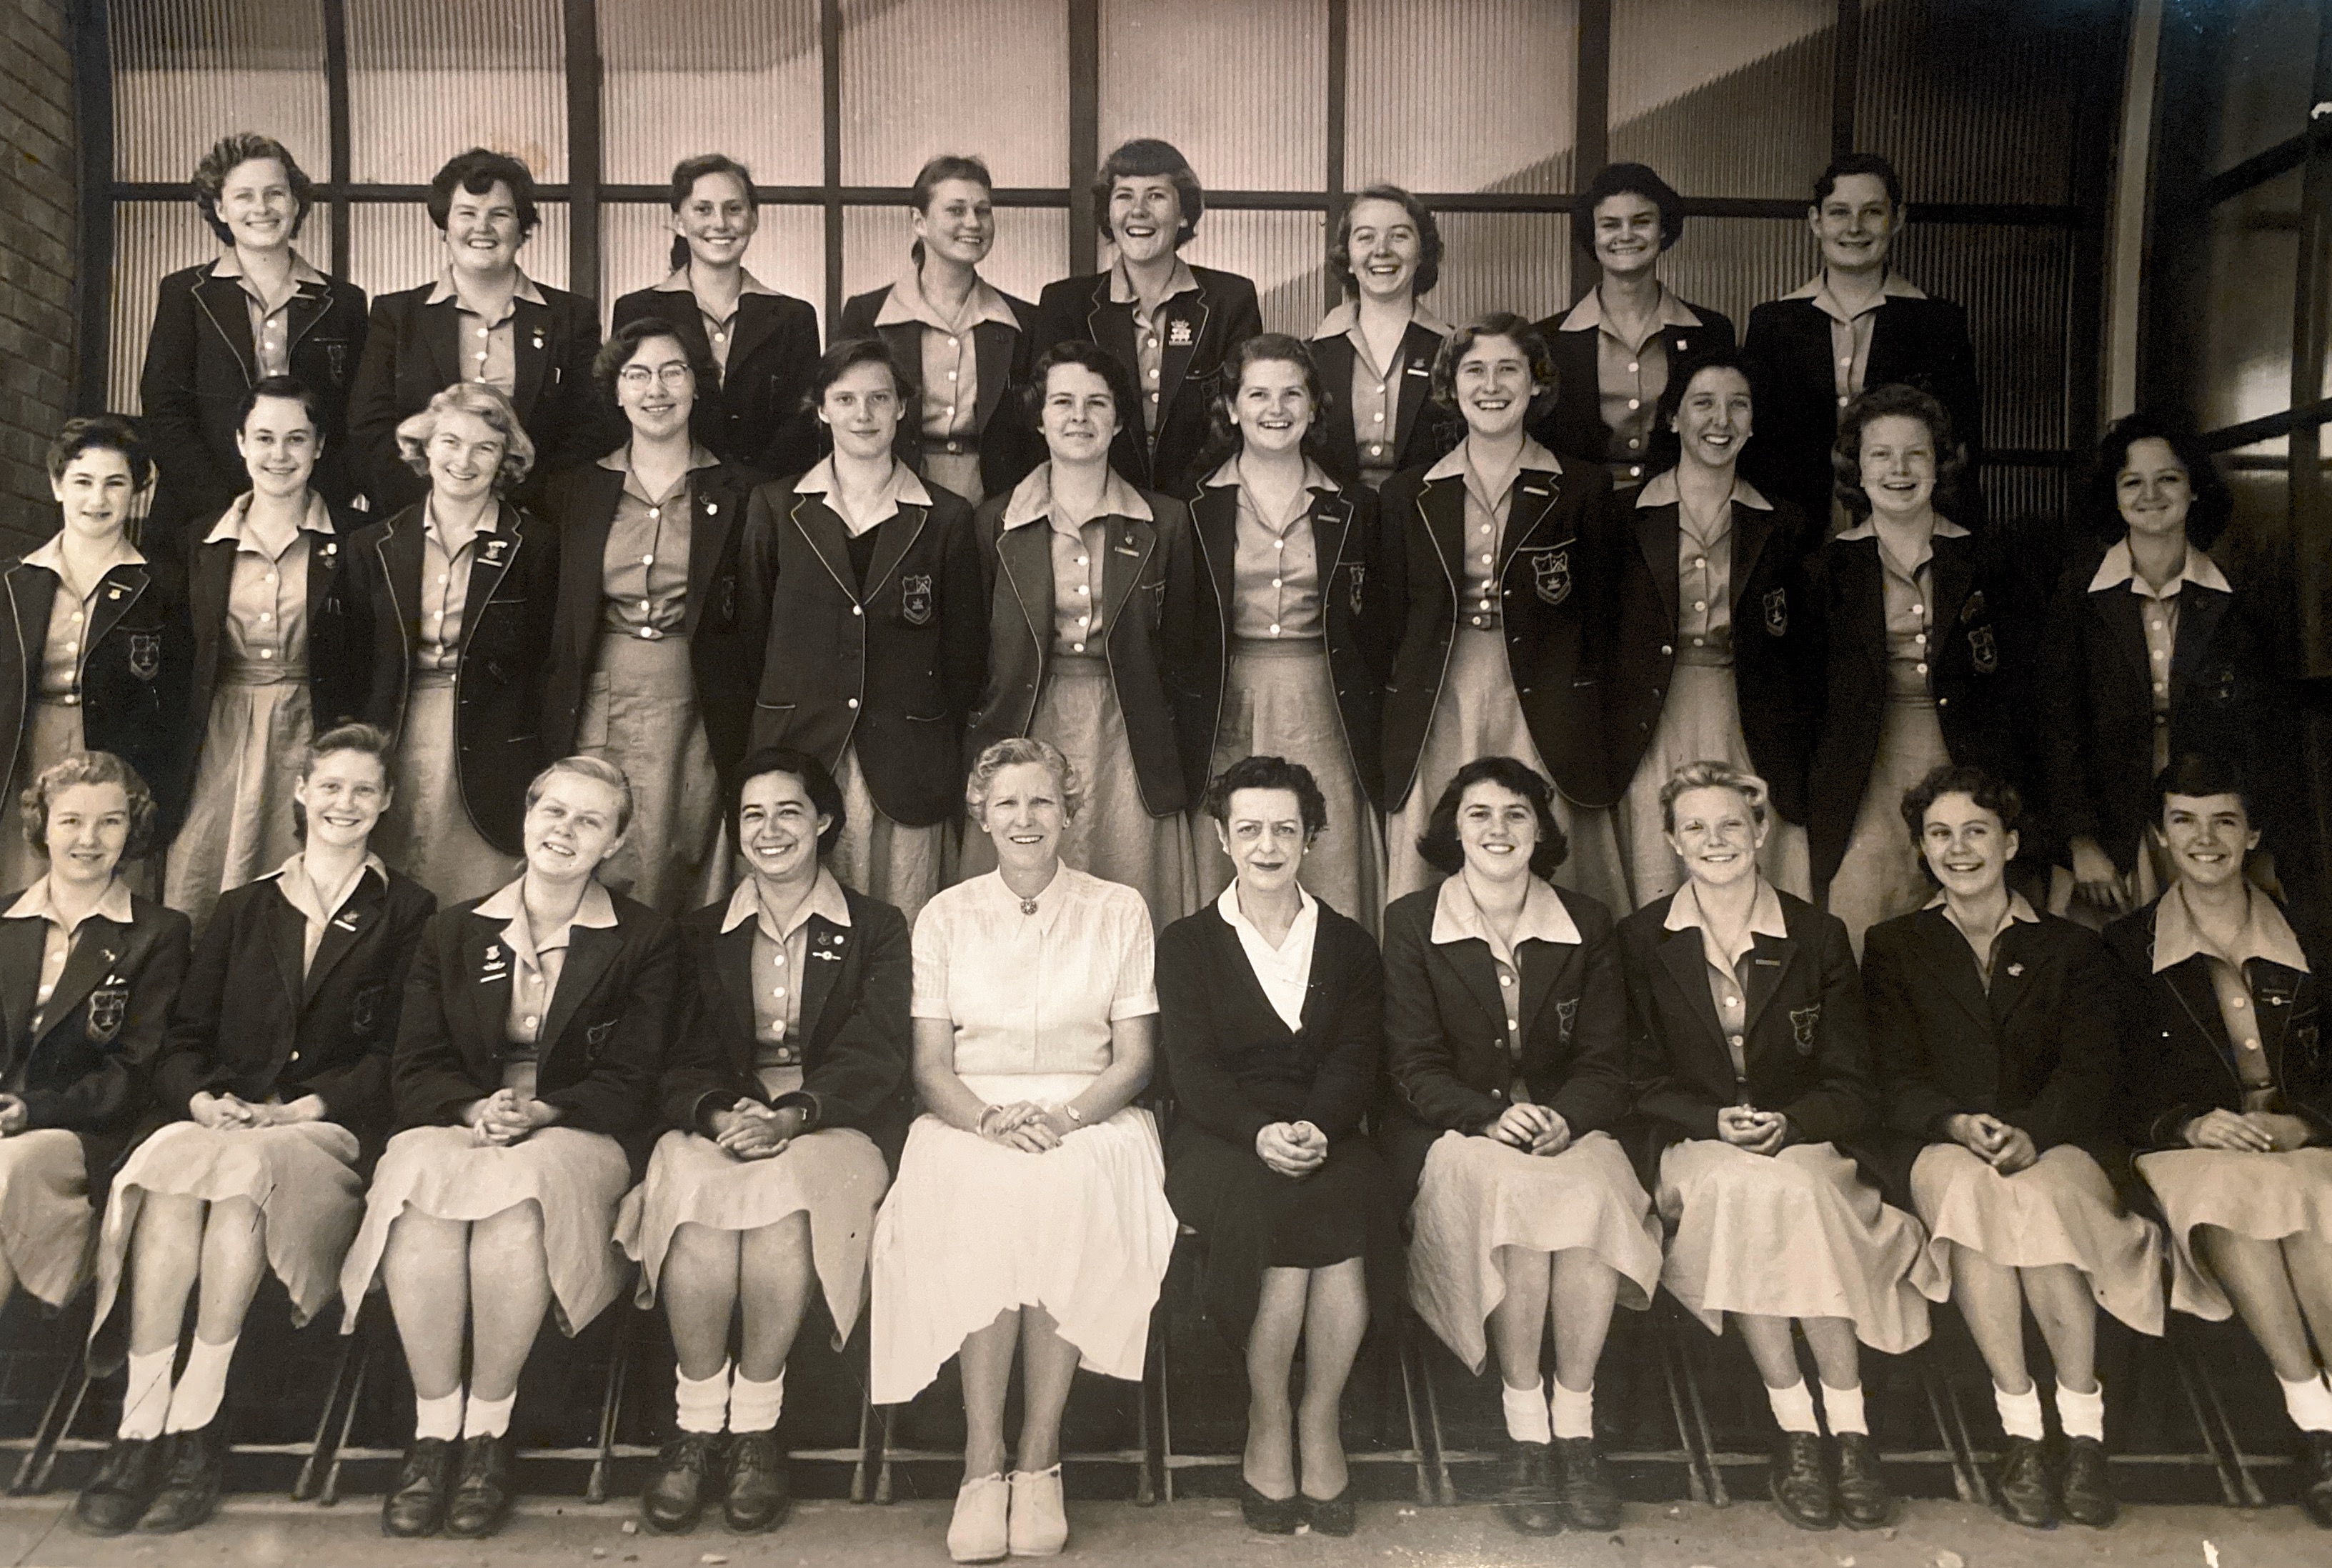 Matric 1956 Laura Trollip 2nd from the left, middle row